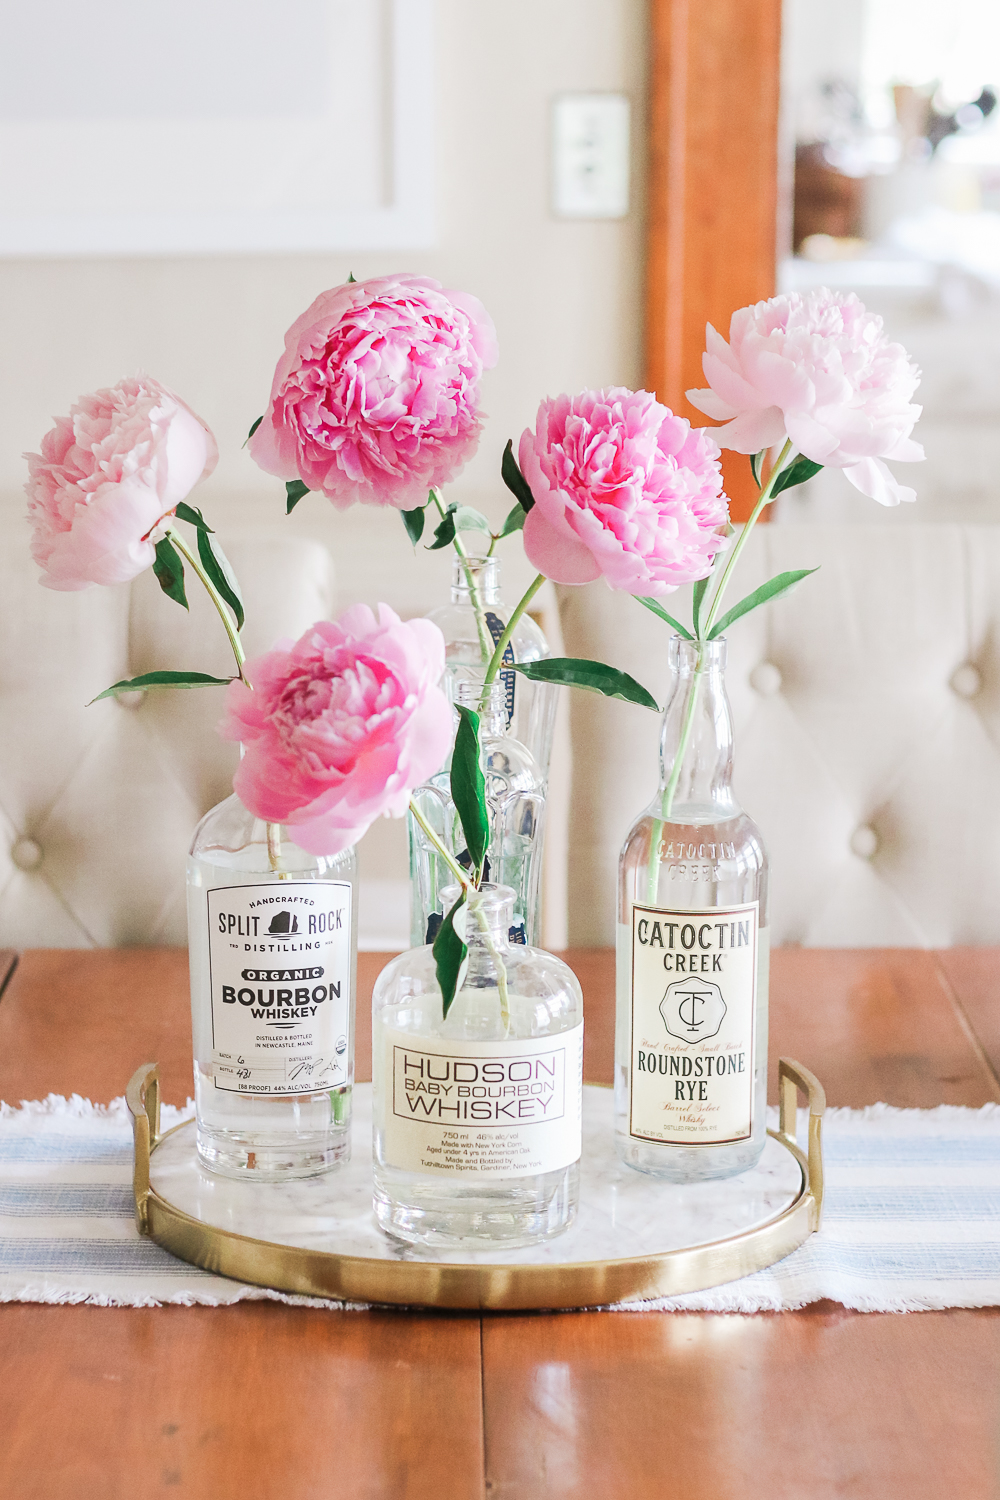 DIY Peony Centerpiece by popular southern lifestyle blogger Stephanie Ziajka on Diary of a Debutante, rustic centerpiece idea with peonies, minimalist rustic flower arrangement with peonies, cheap wedding table centerpieces, rustic home decor ideas